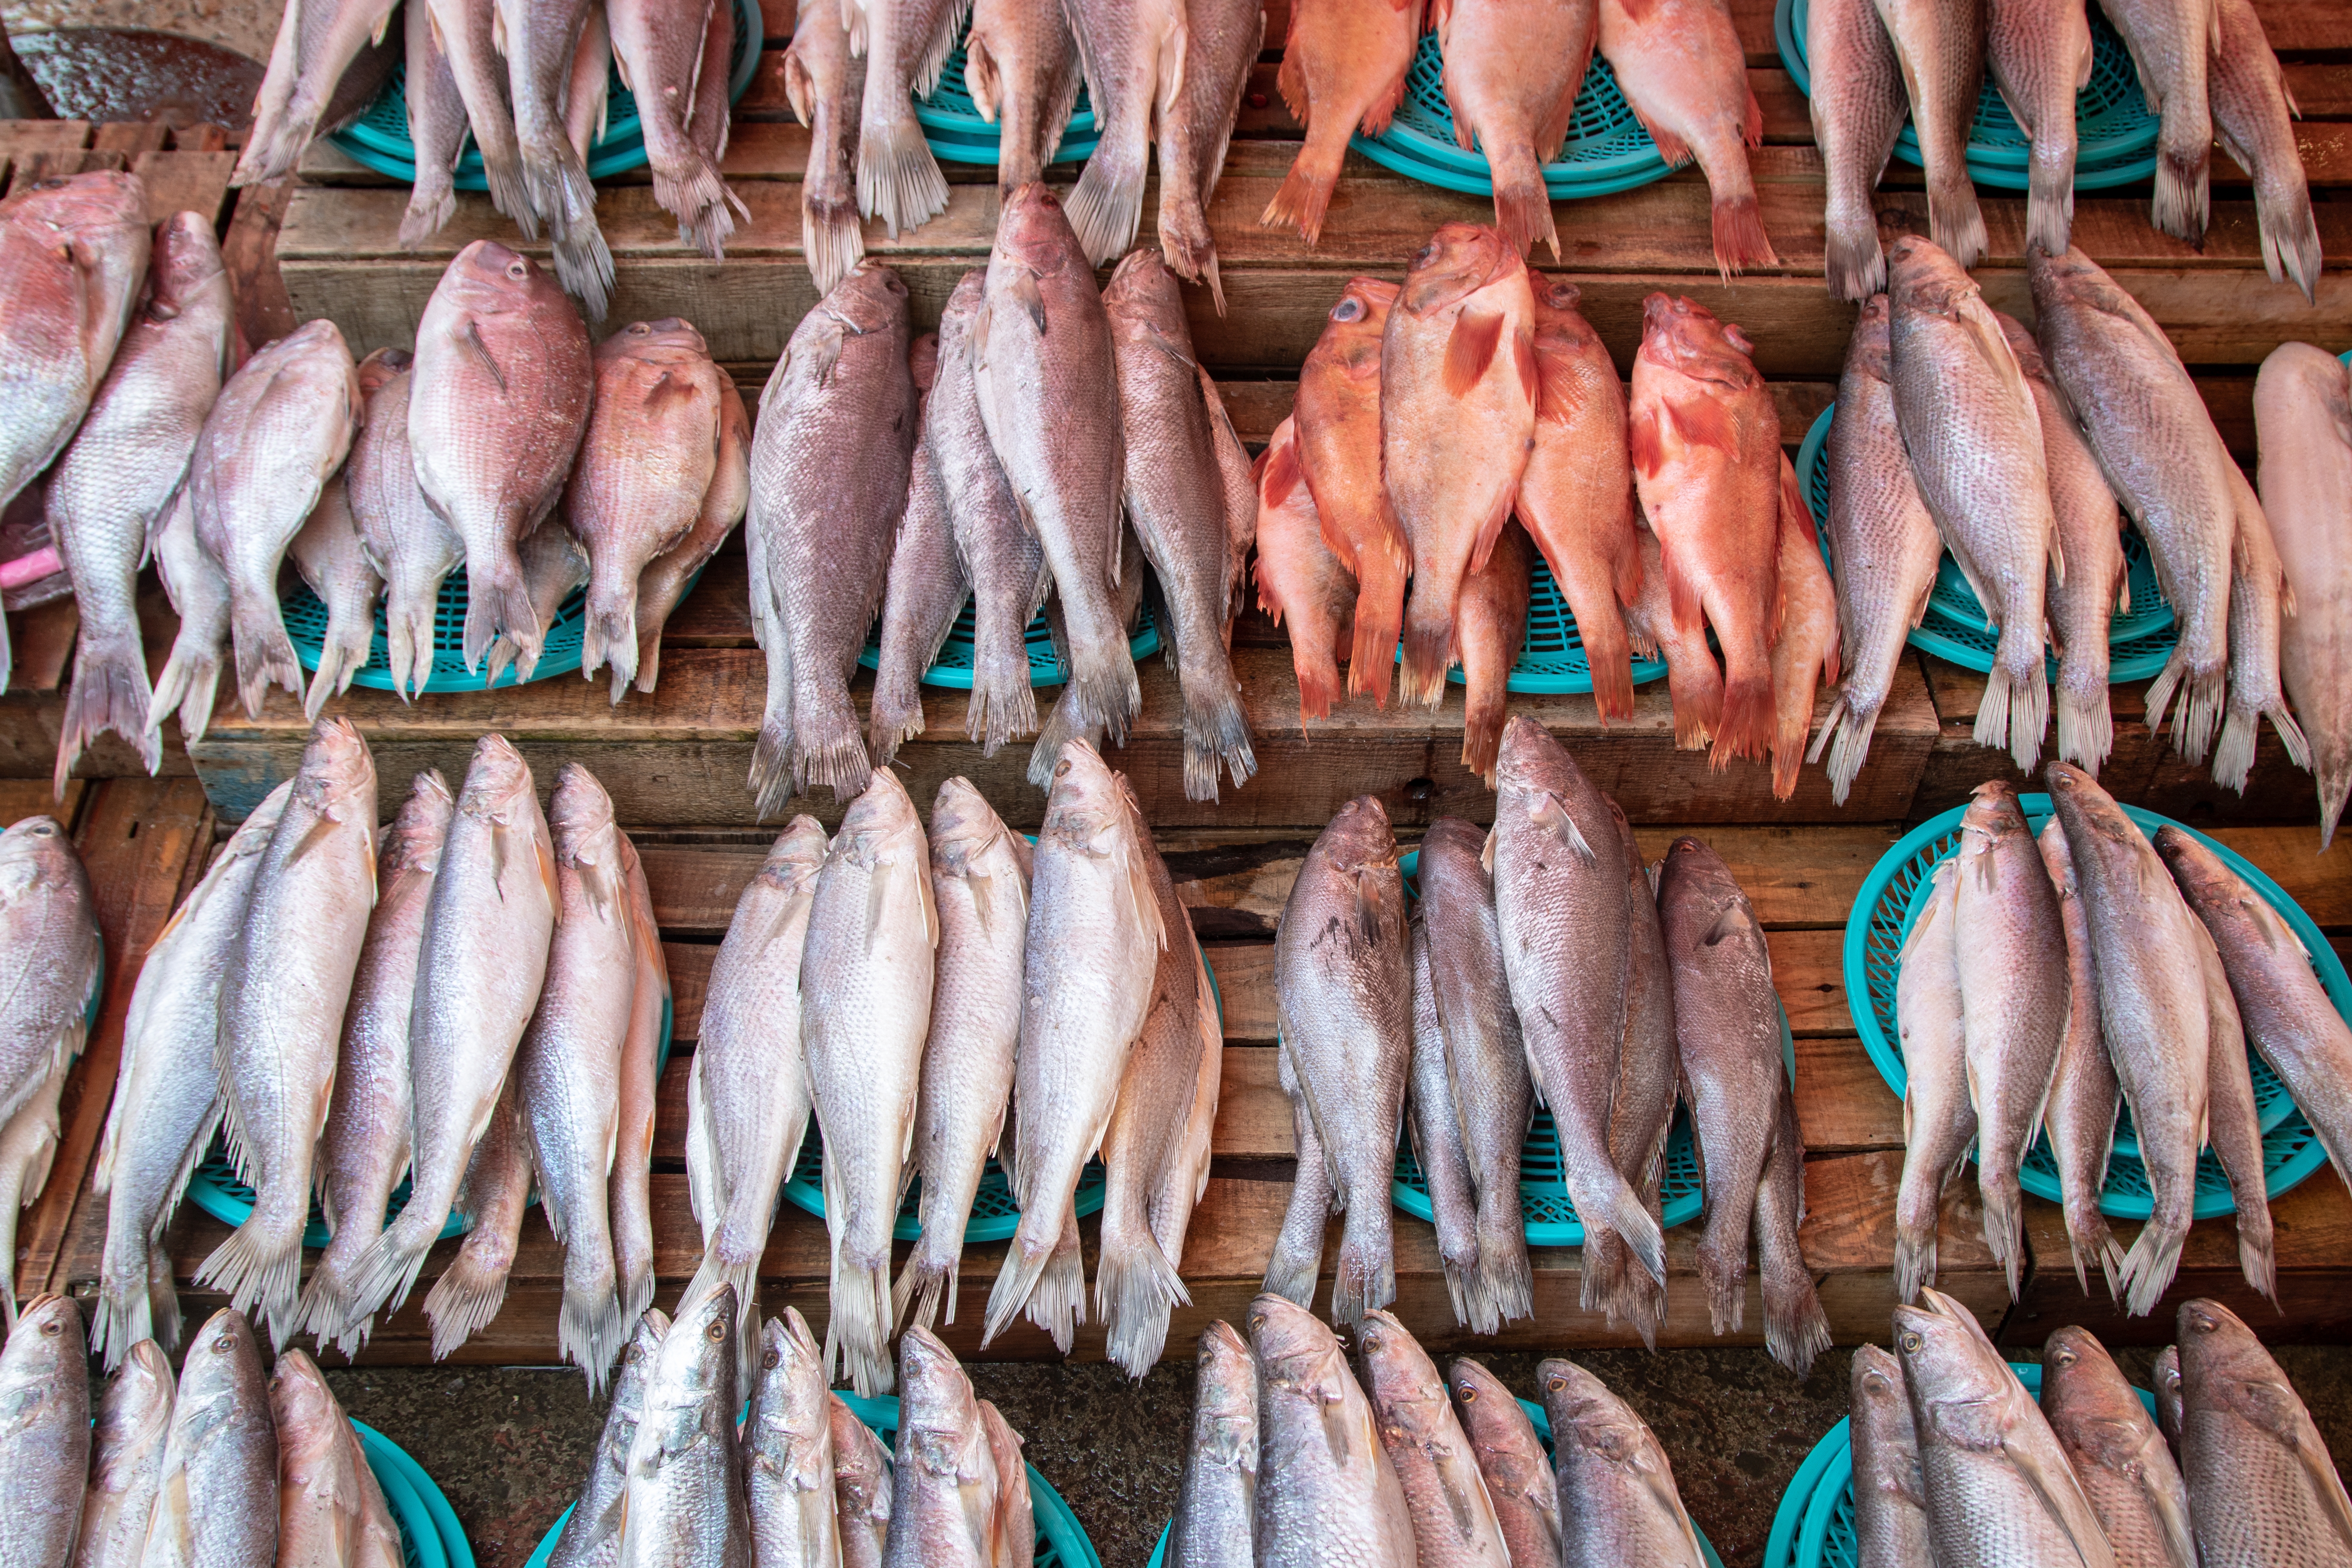 High-risk seafood is entering Korea due to ineffective import controls